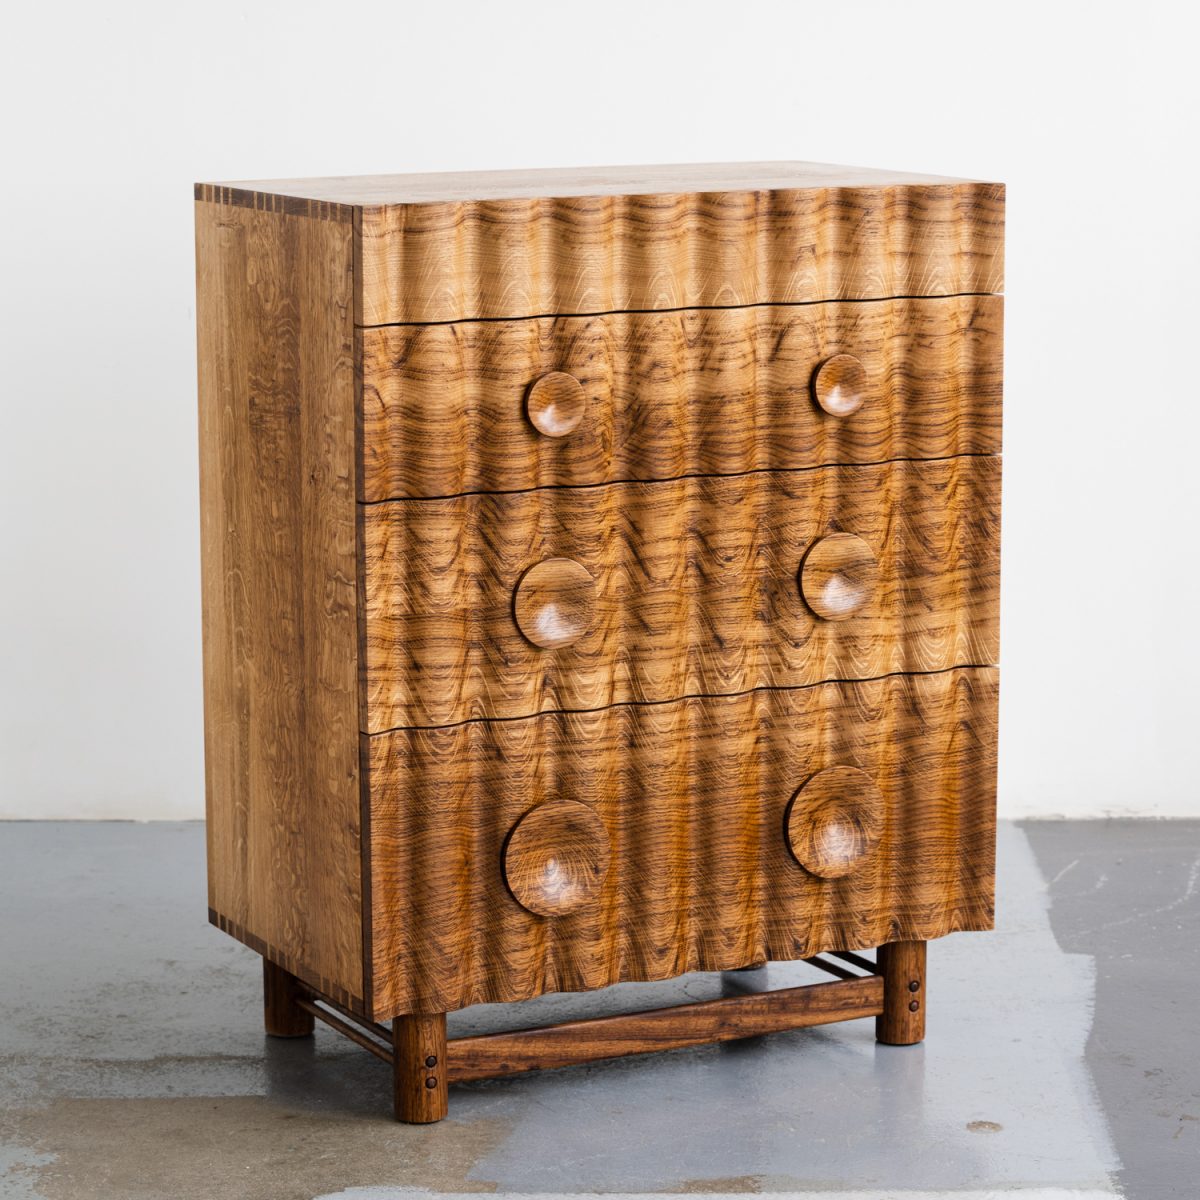 Bowater Chest of Drawers, a tiered four drawer unit. The signature ripple facade is digitally profiled from brown oak, hand-turned leg and handle details with a removable base, The carcass is made from solid timber with dovetail joinery